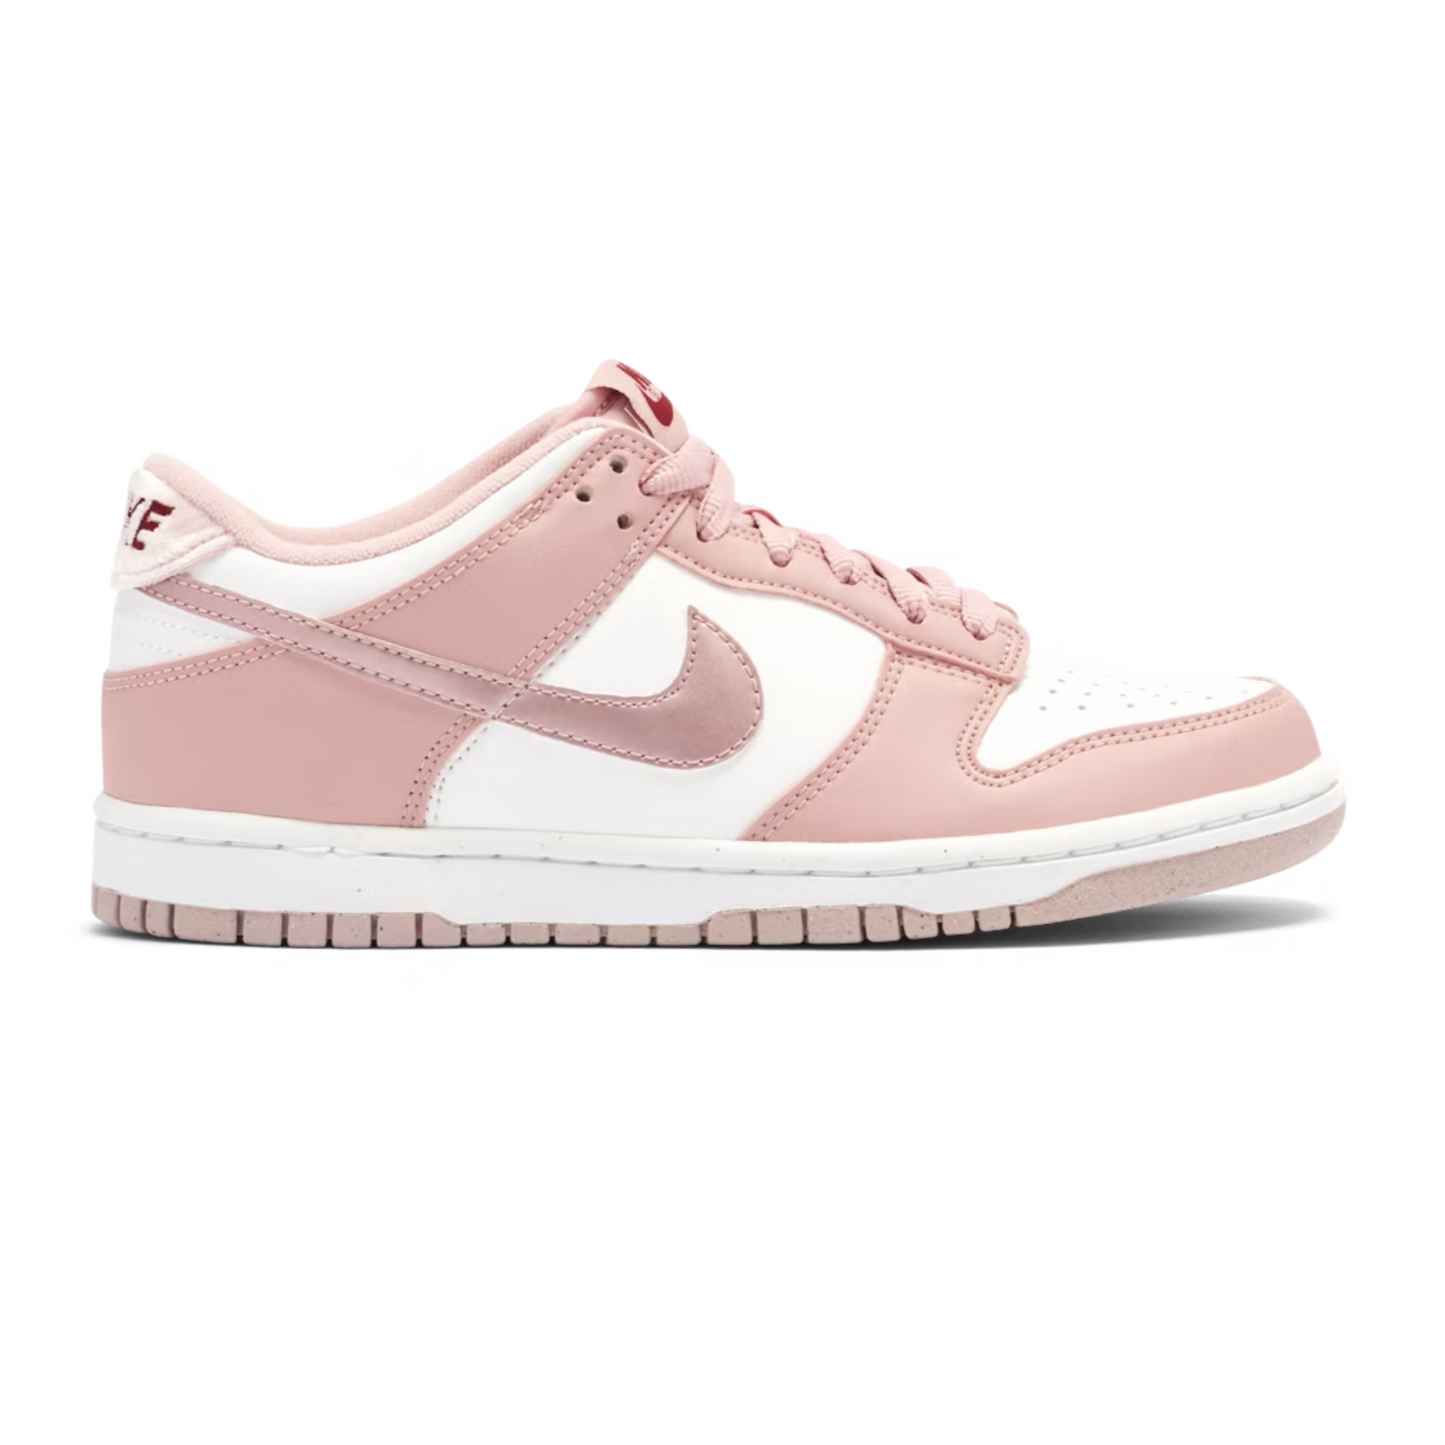 Nike Dunk Low Pink Velvet (GS) from Nike